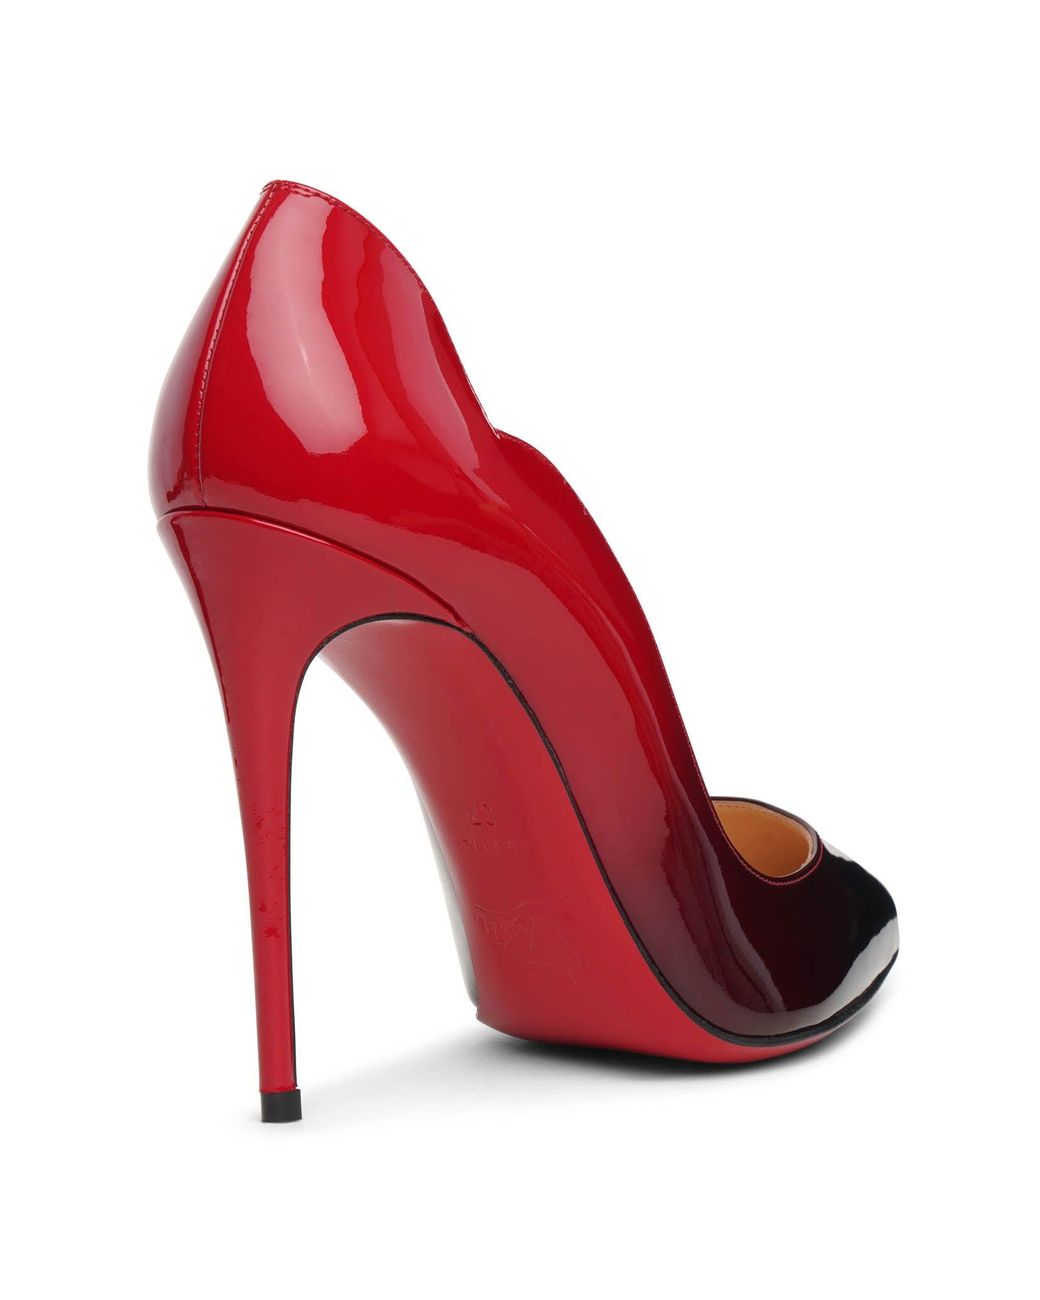 Louboutin - the red that drives women crazy